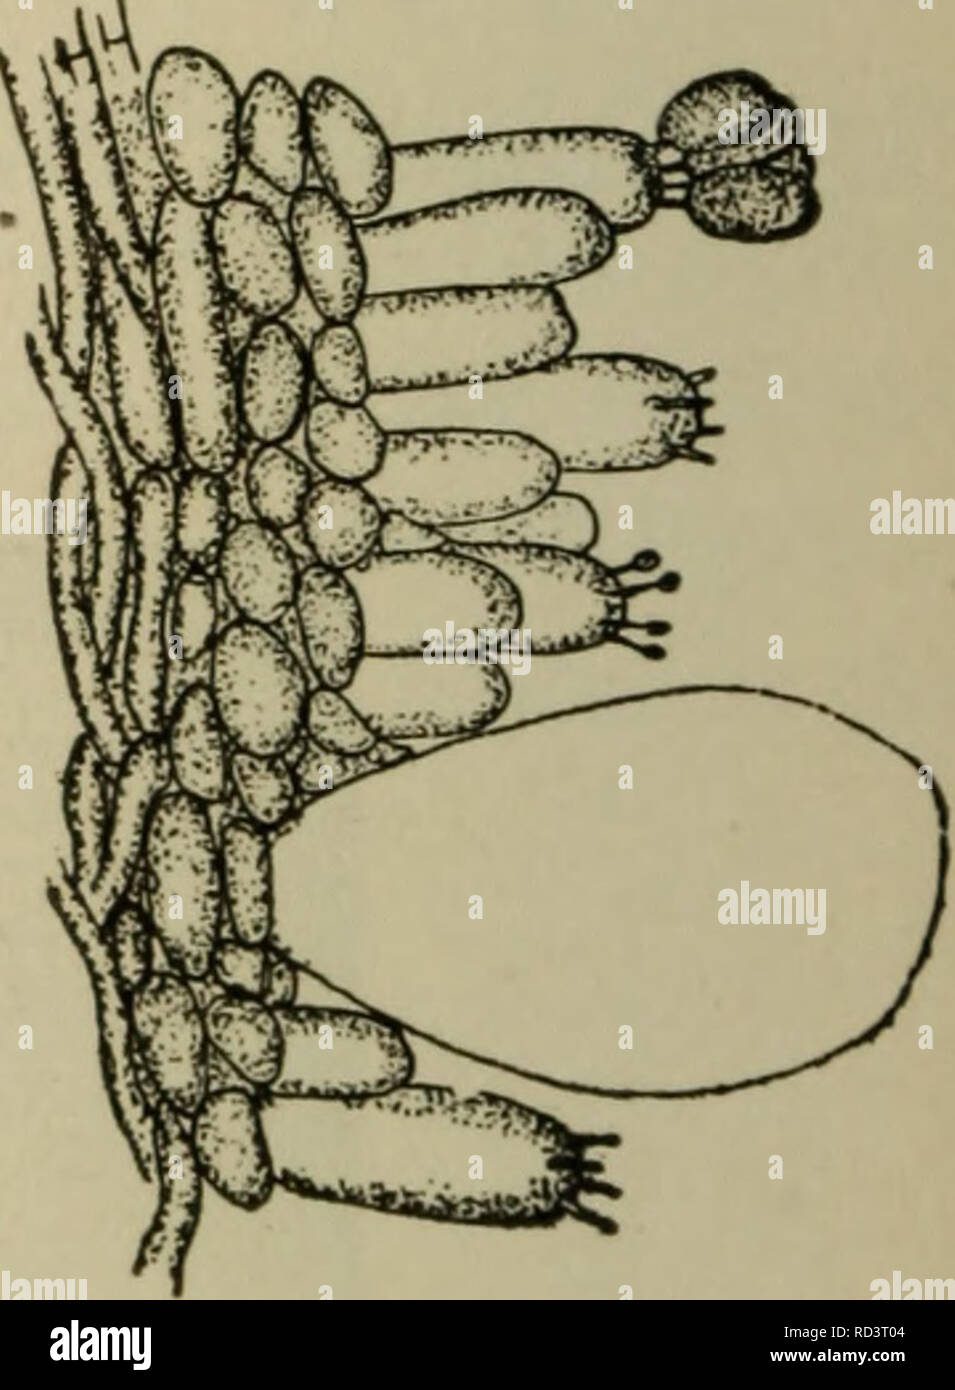 . Elementary botany. Botany. Fig. 432. Portion of section of lamella of Agaricus campestris. trf trama ; s/i, subhymenium ; /&gt;, basidium; st, sterigma (//. sterigmata) ; gt gonidium. ^ig- 433- Portion of hymenium of Co- prinus micaceus, showing large cystidium in the hymenium. two spinous processes at the free end. Each one is a sierig'ma (plural slerig'mala), and bears a gonidium. In a majority of the members of the mushroom family each basidium bears four gonidia. When mature these gonidia easily fall away, and a mass of them gives a purplish-black color to objects on which they fall, so  Stock Photo